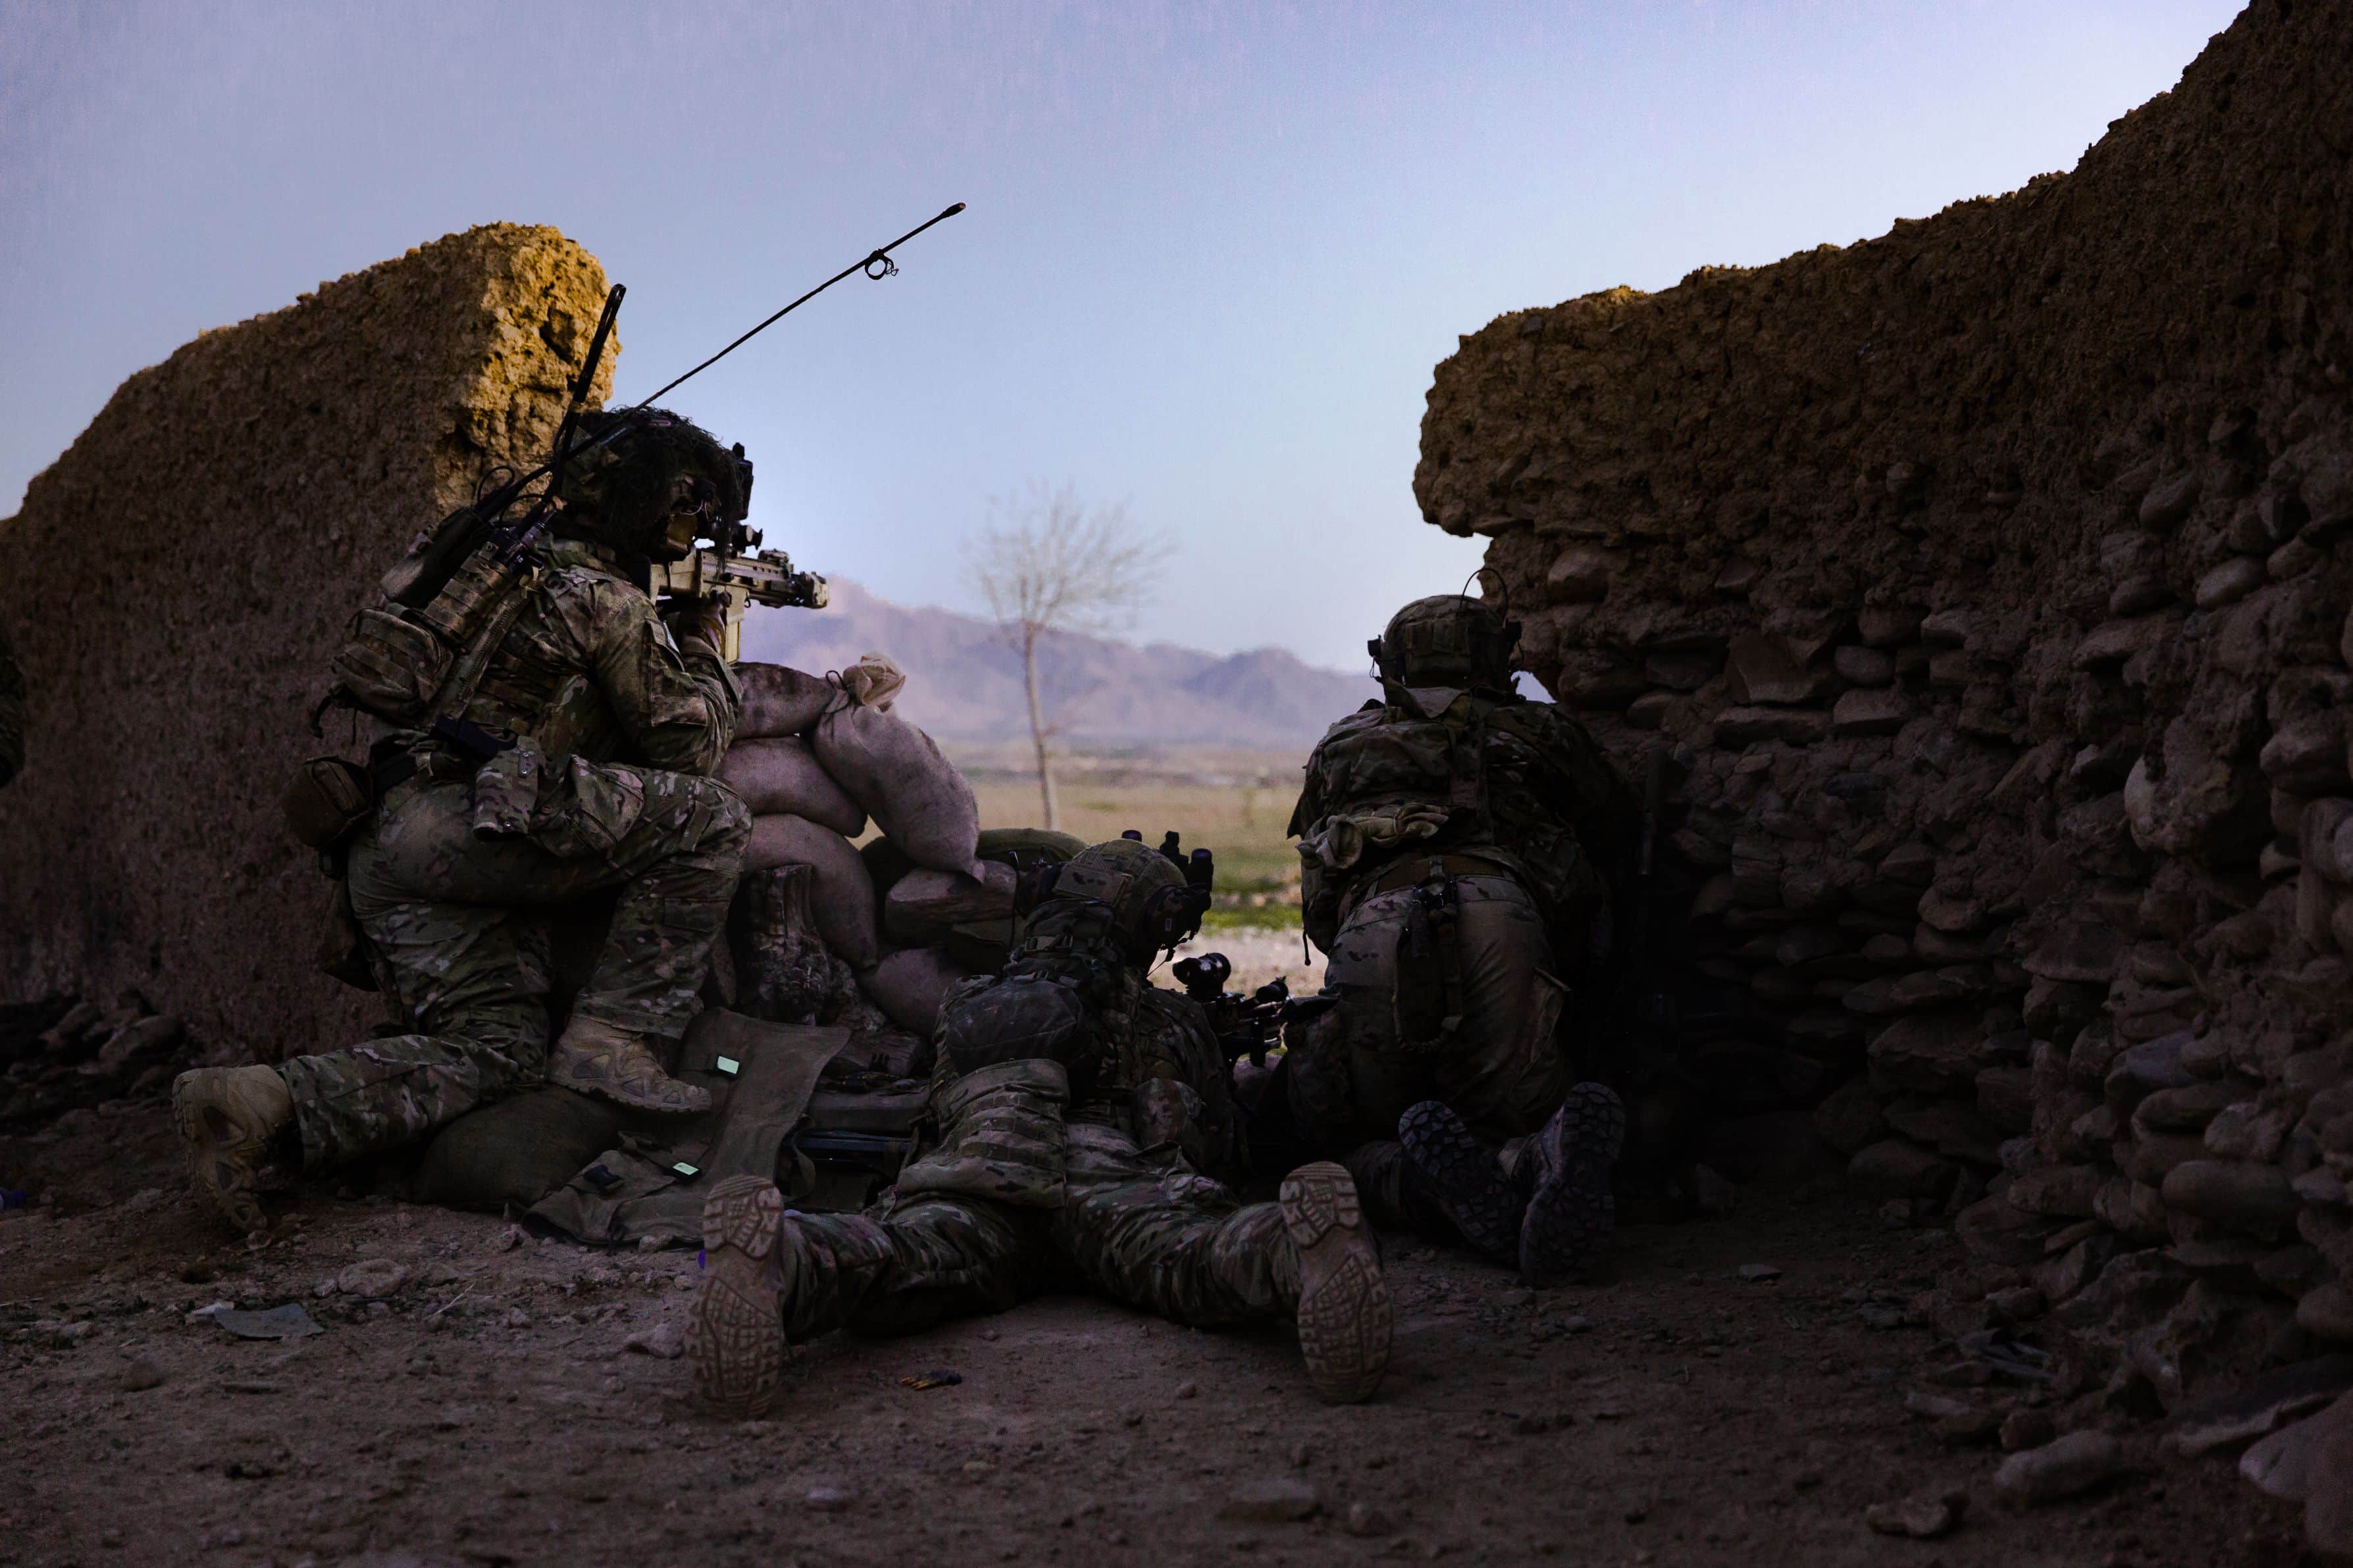 U.S. special operations forces members conduct combat operations in support of Operation Resolute Support (RS) in Southwest Afghanistan, March 2019. RS is a Nato-led mission to train, advise, and assist the Afghan National Defense and Security Forces and institutions. (U.S. Army photo by Spc. Jonathan Bryson)